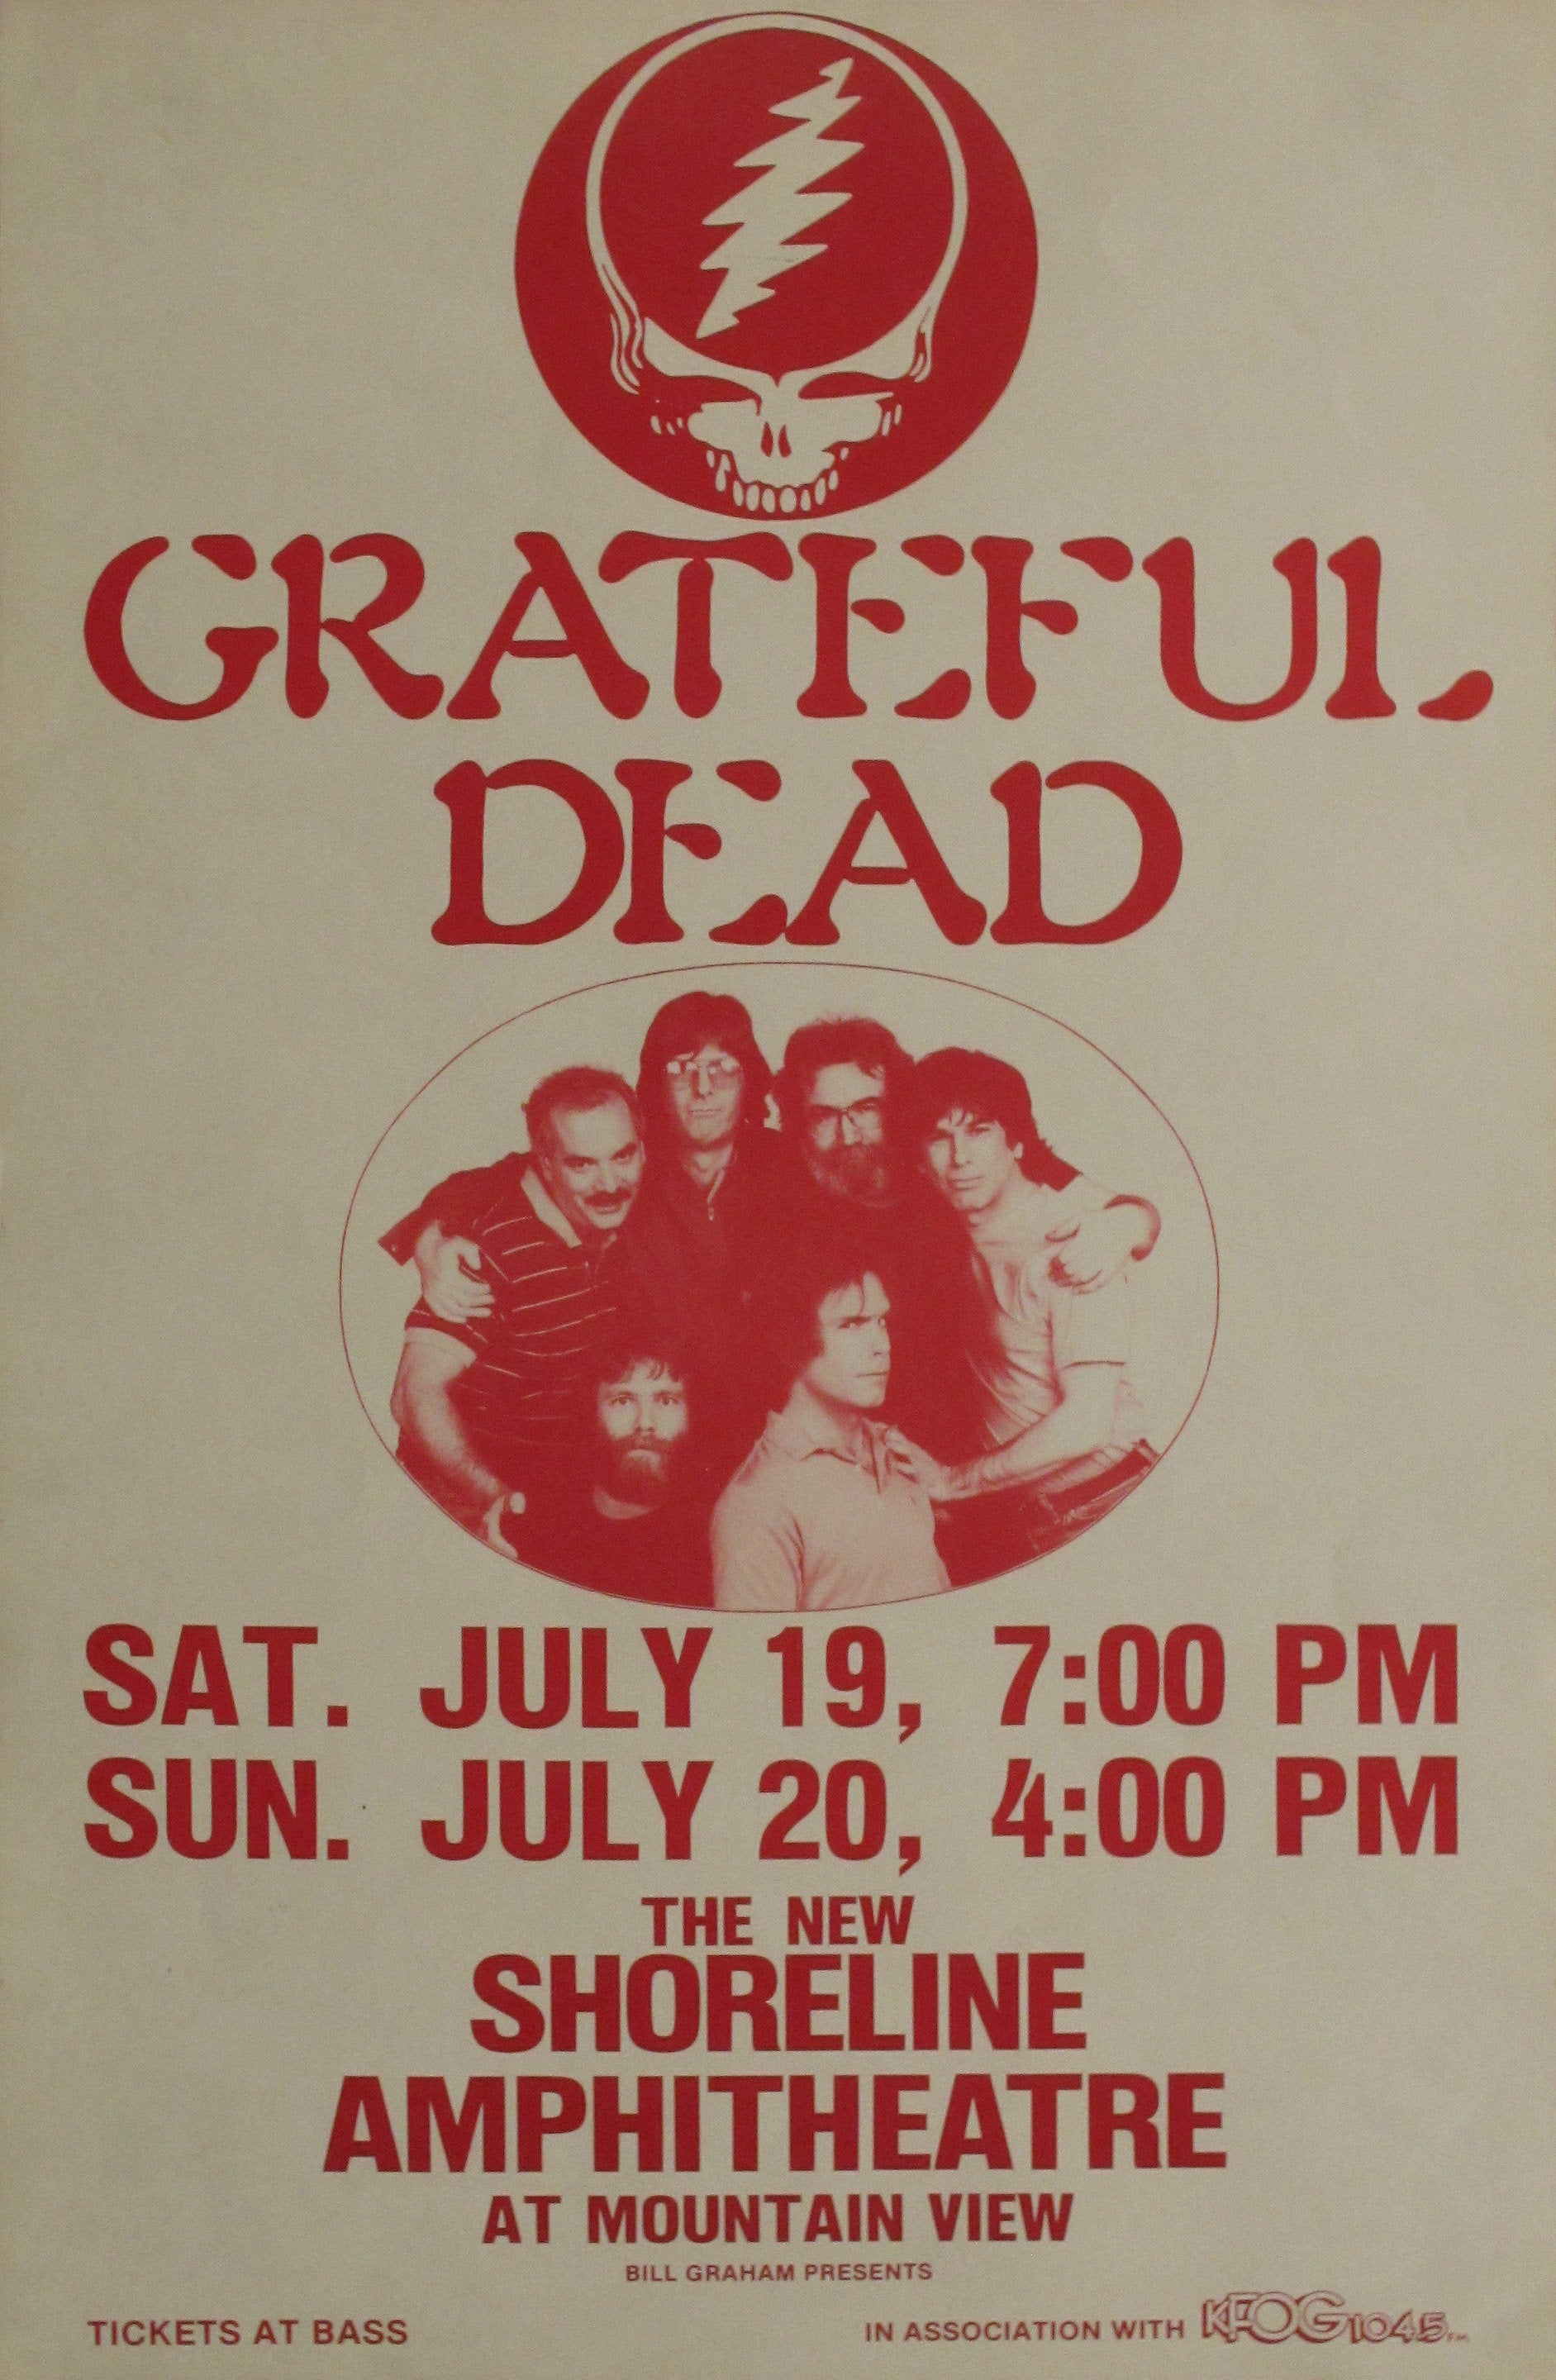 Vintage Music Art  - The Grateful Dead At Mountain View   0687